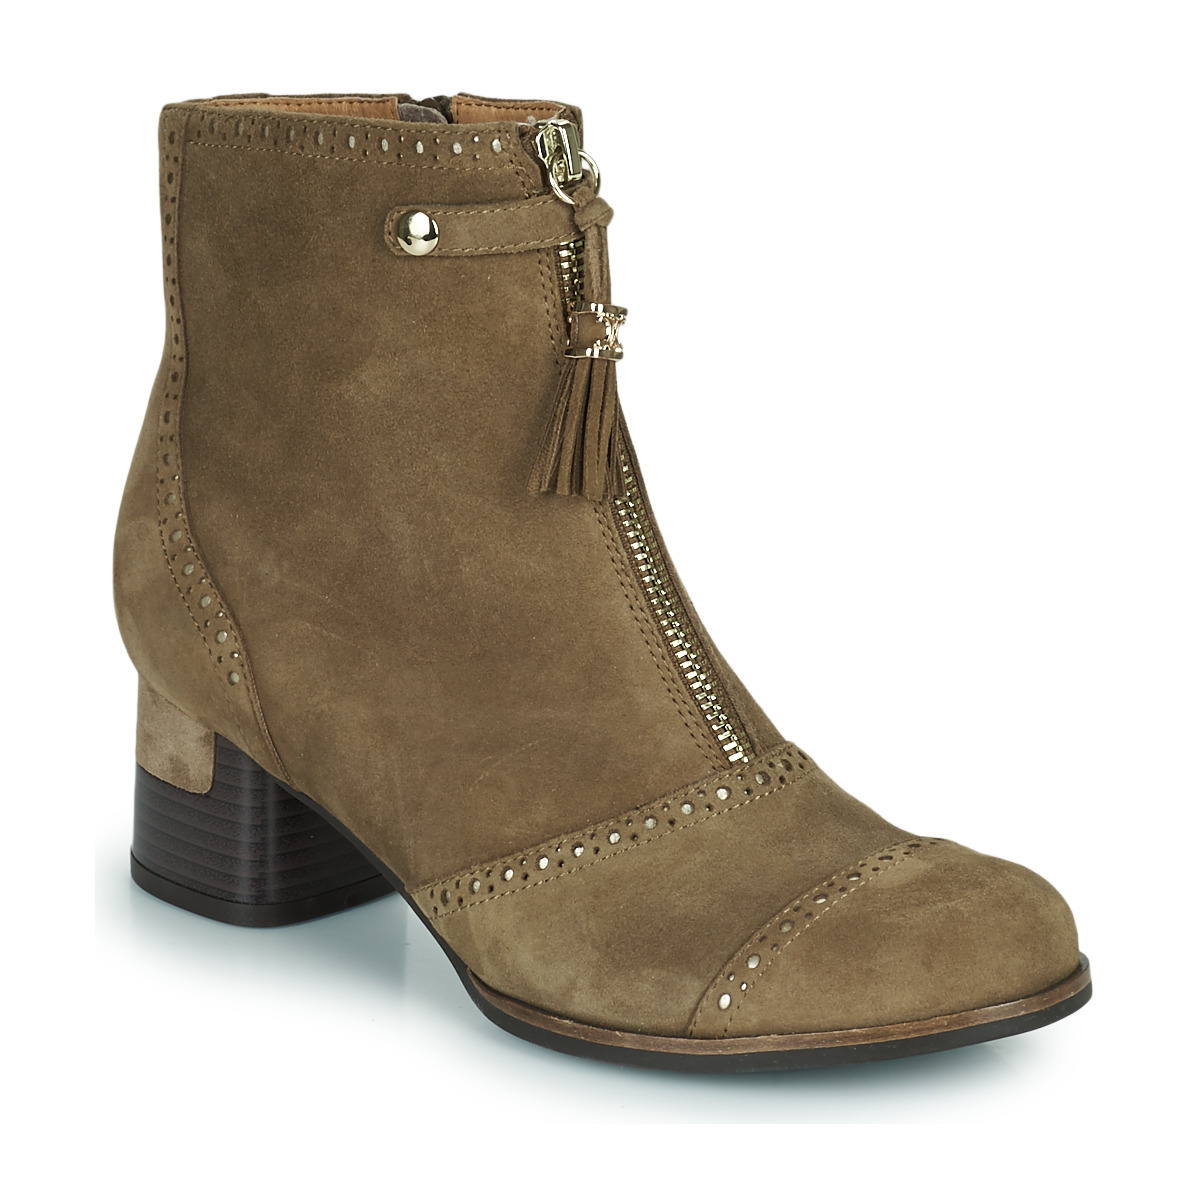 Beige Ankle Boots for Woman at Spartoo GOOFASH